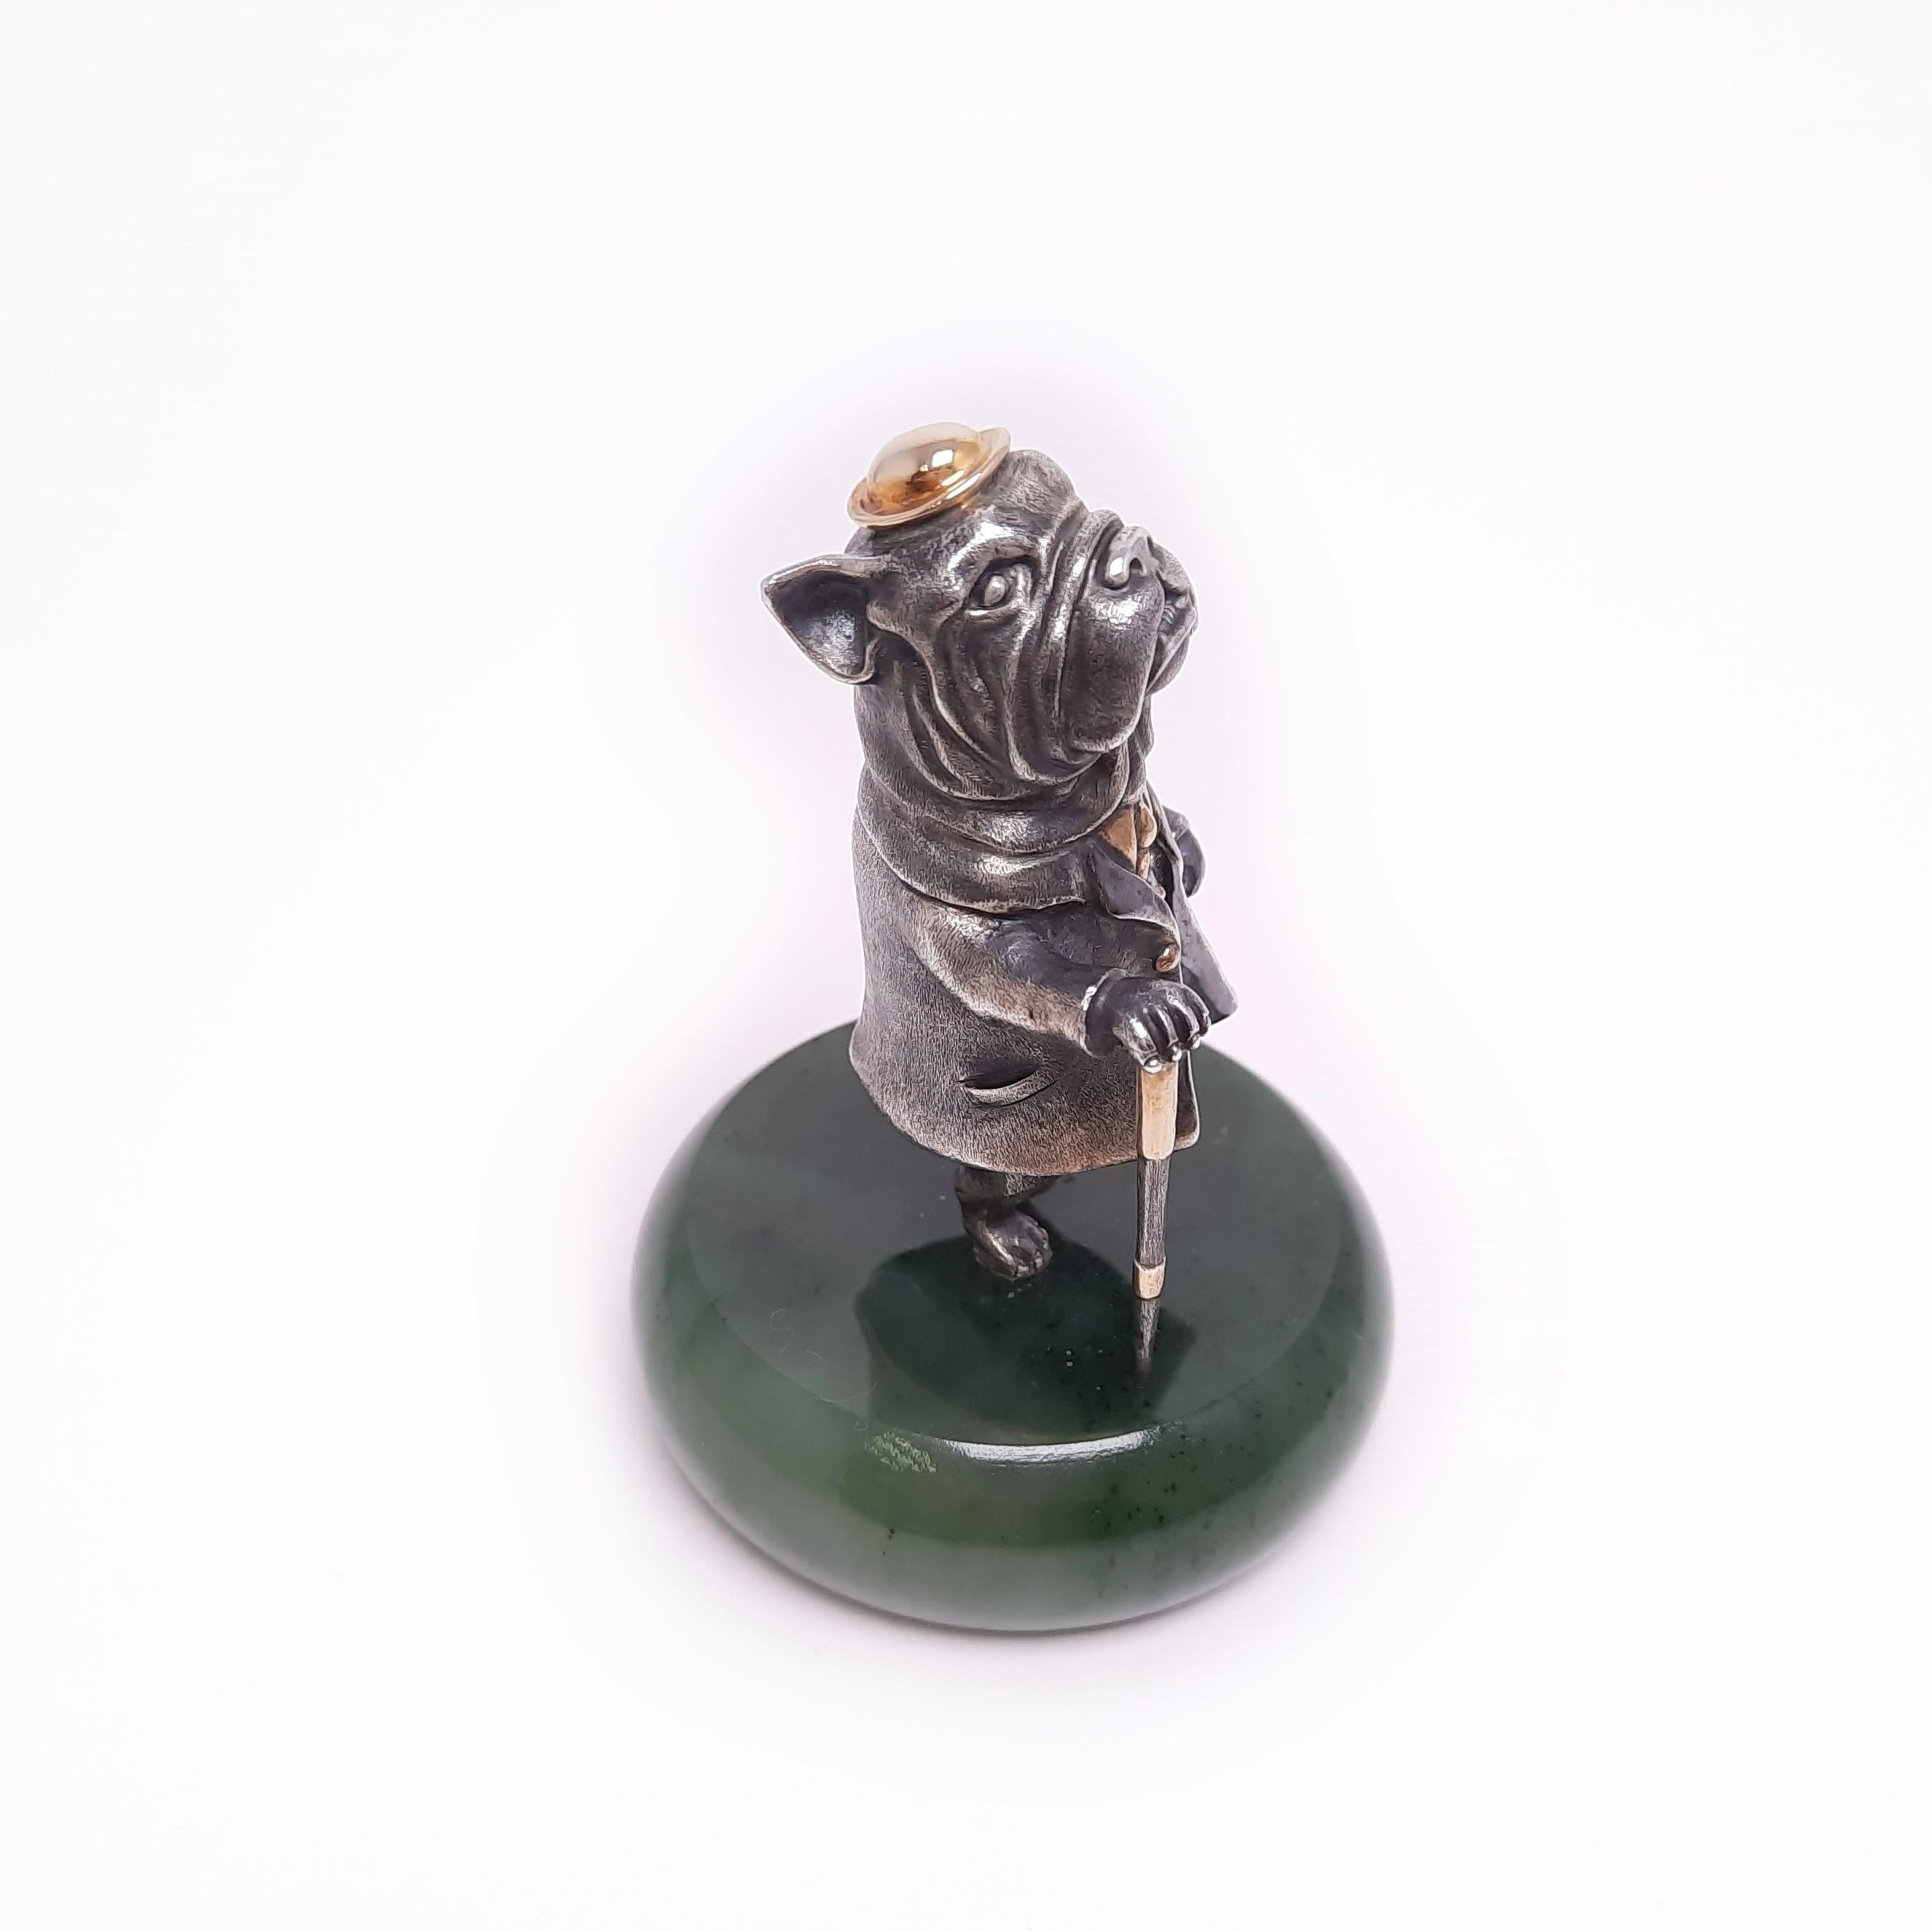 The Dog, a symbol of intelligence and protection, promises to bring wealth, prosperity, and success in love and work. Each artistic figurine from MOISEIKIN is created in the best sculpture technique and is embedded with a special magnet that